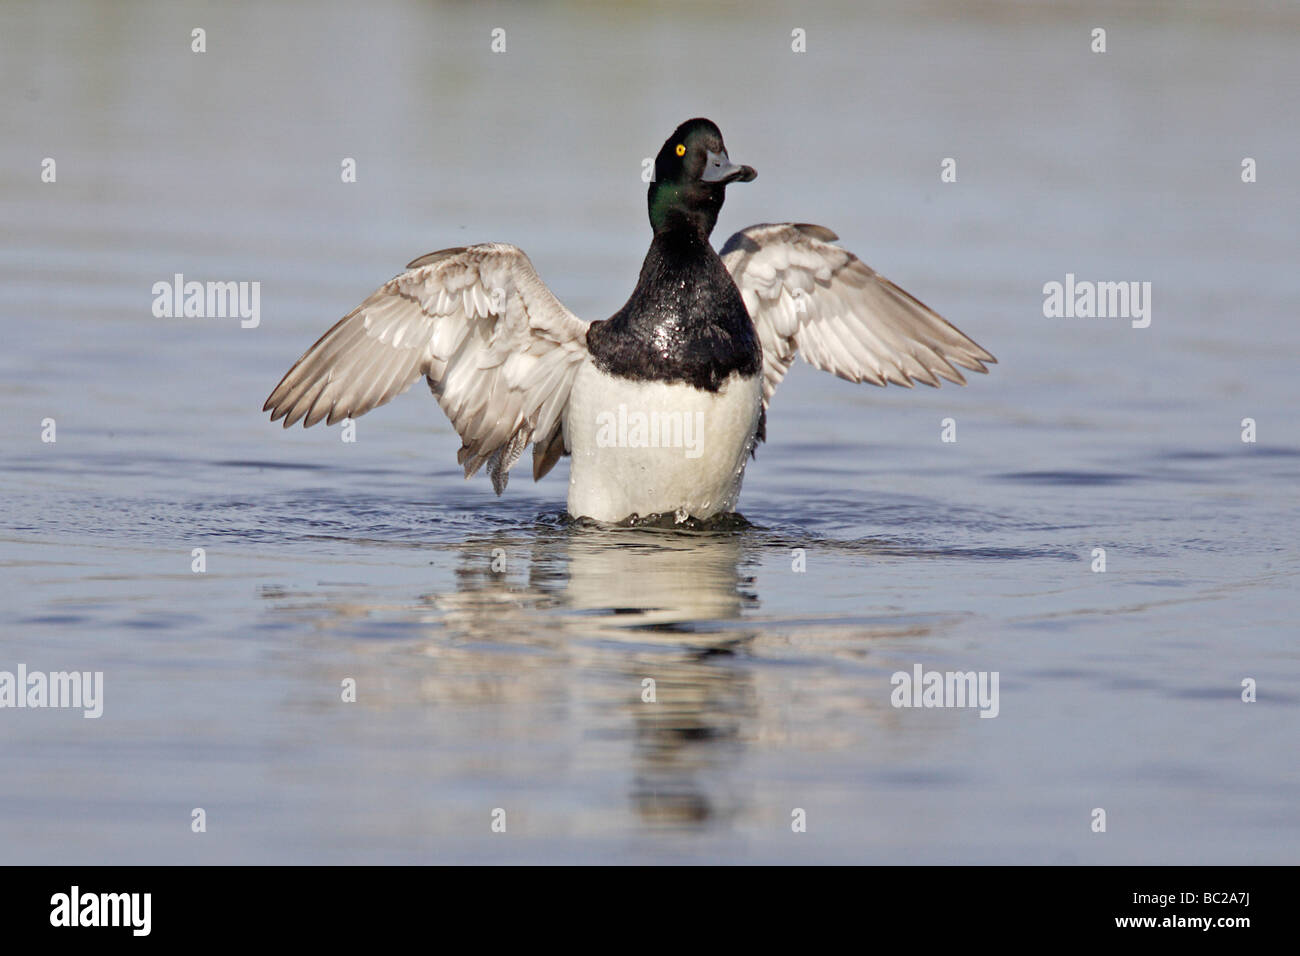 Male Tufted Duck flapping its wings Stock Photo